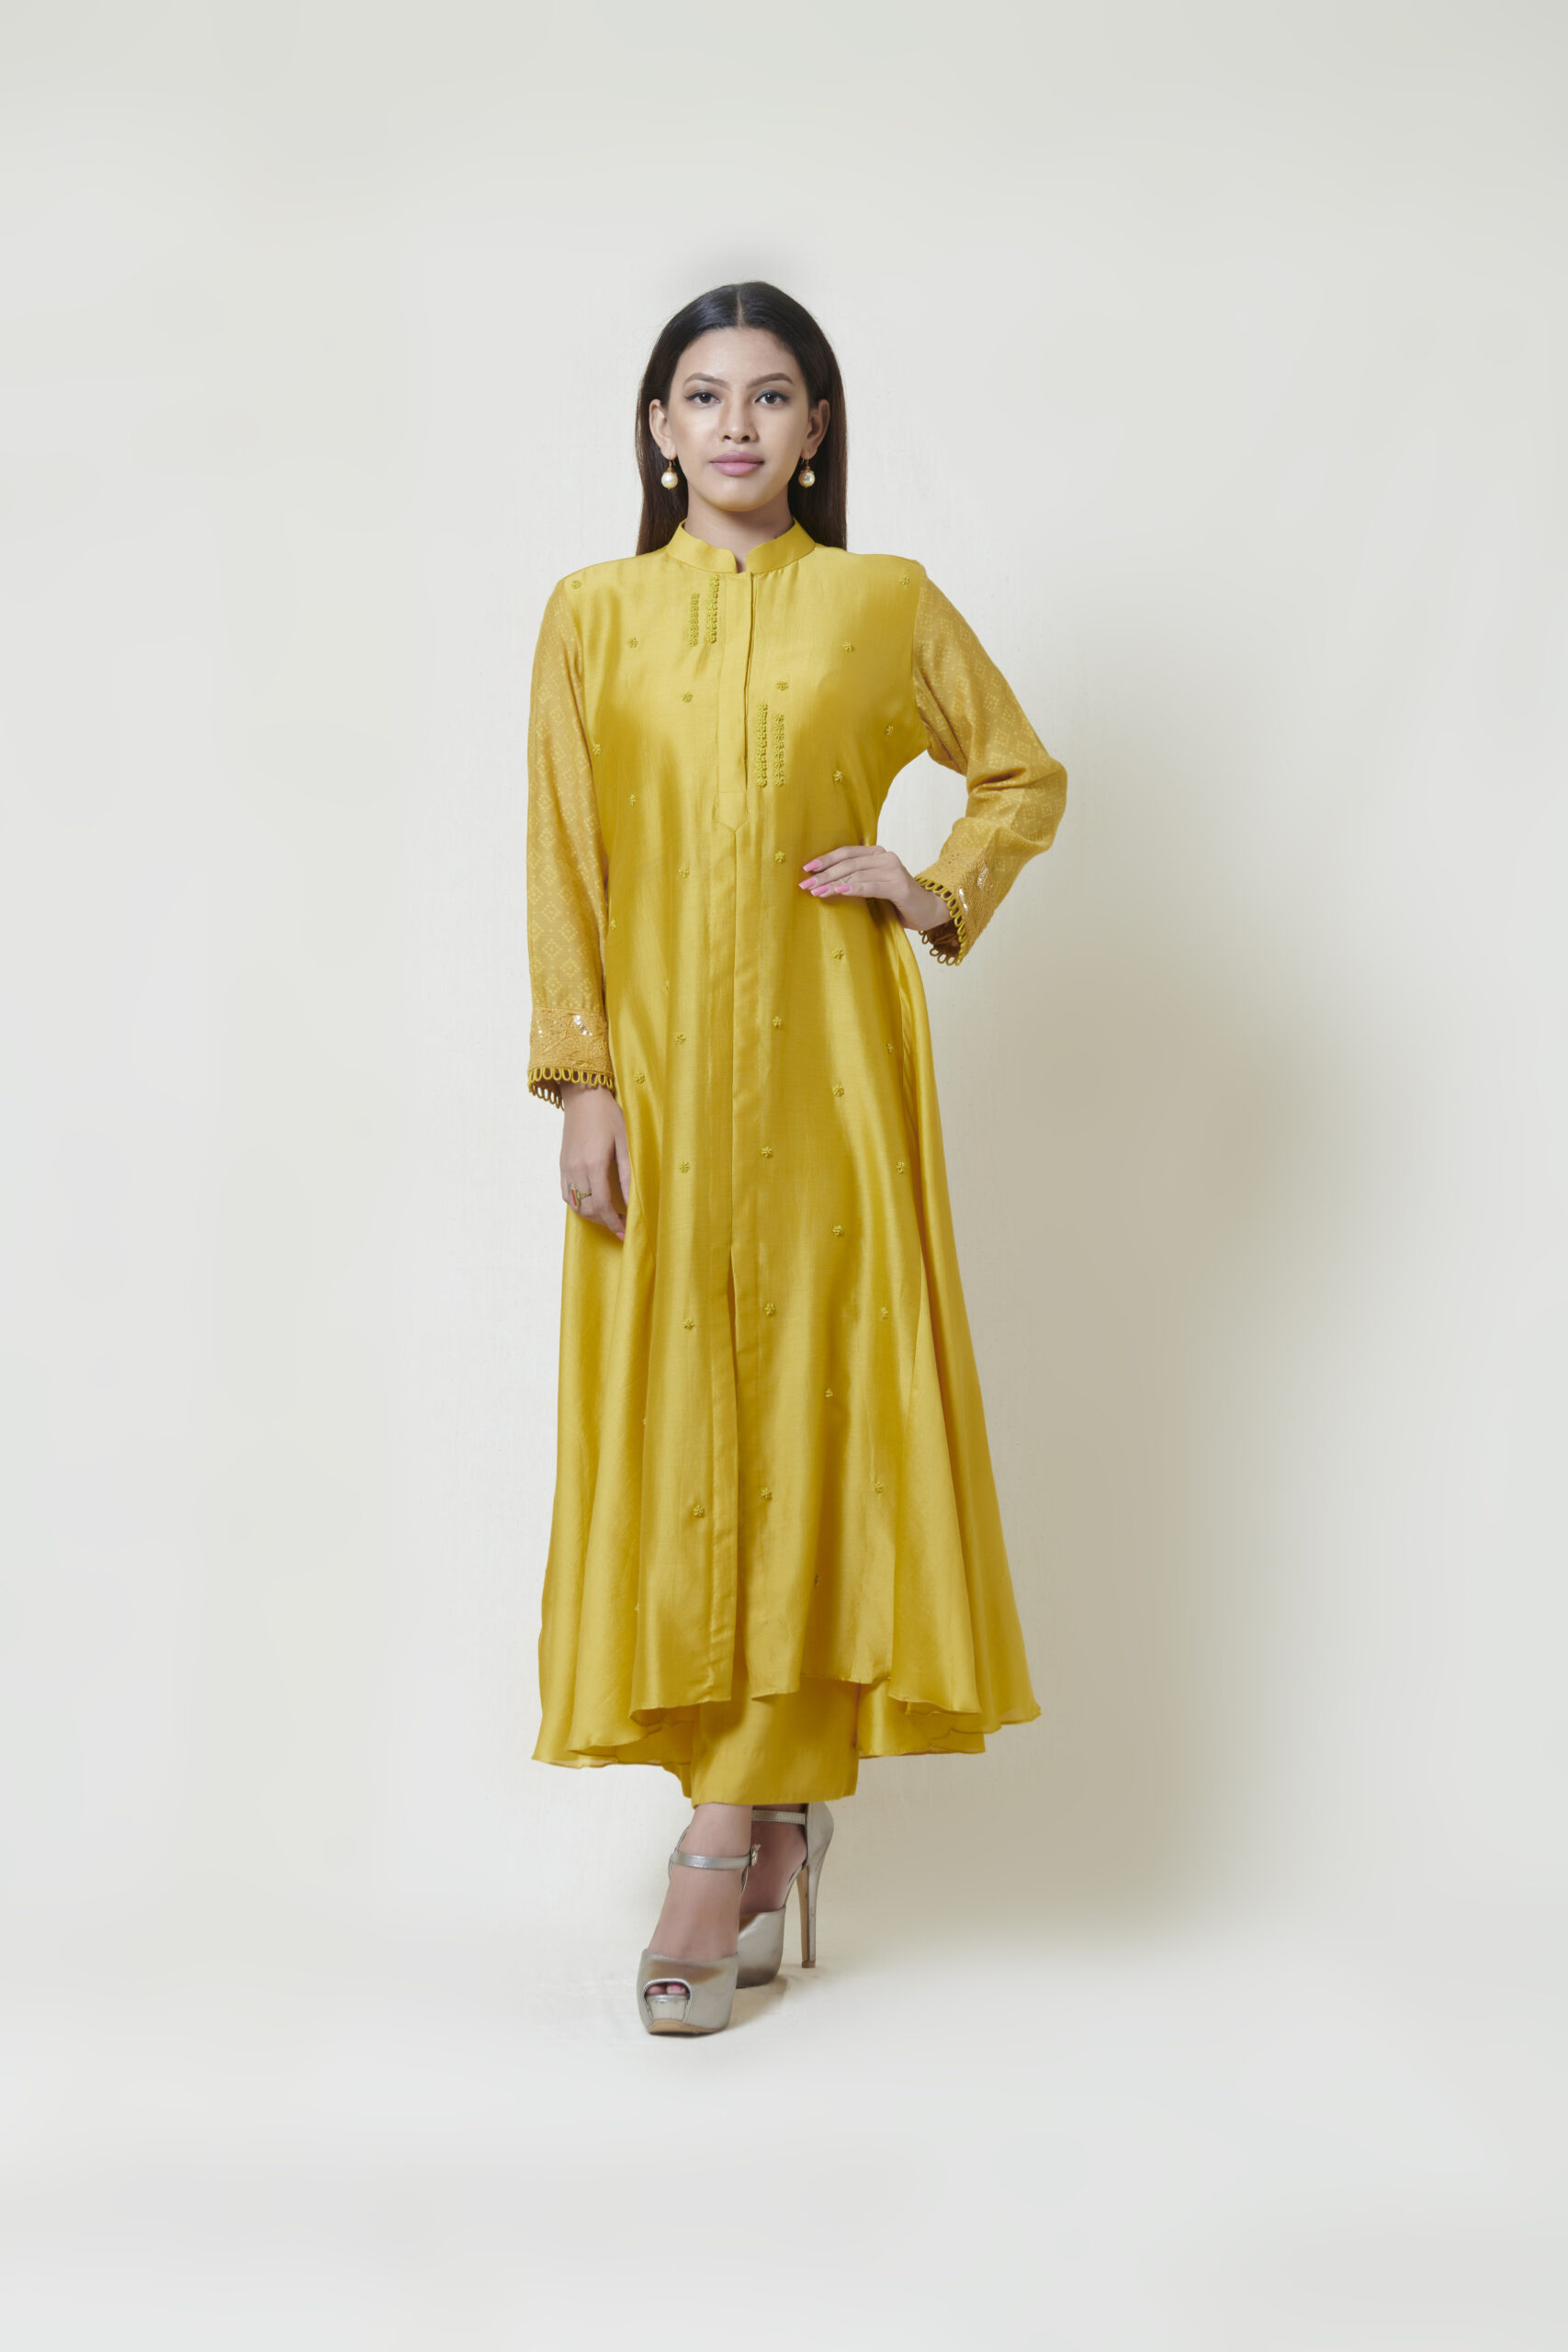 Golden yellow full sleeved centre slit kurta in chanderi with french knot and spring thread hand embroidery highlighted with glass beads. It comes along with a pair of pants